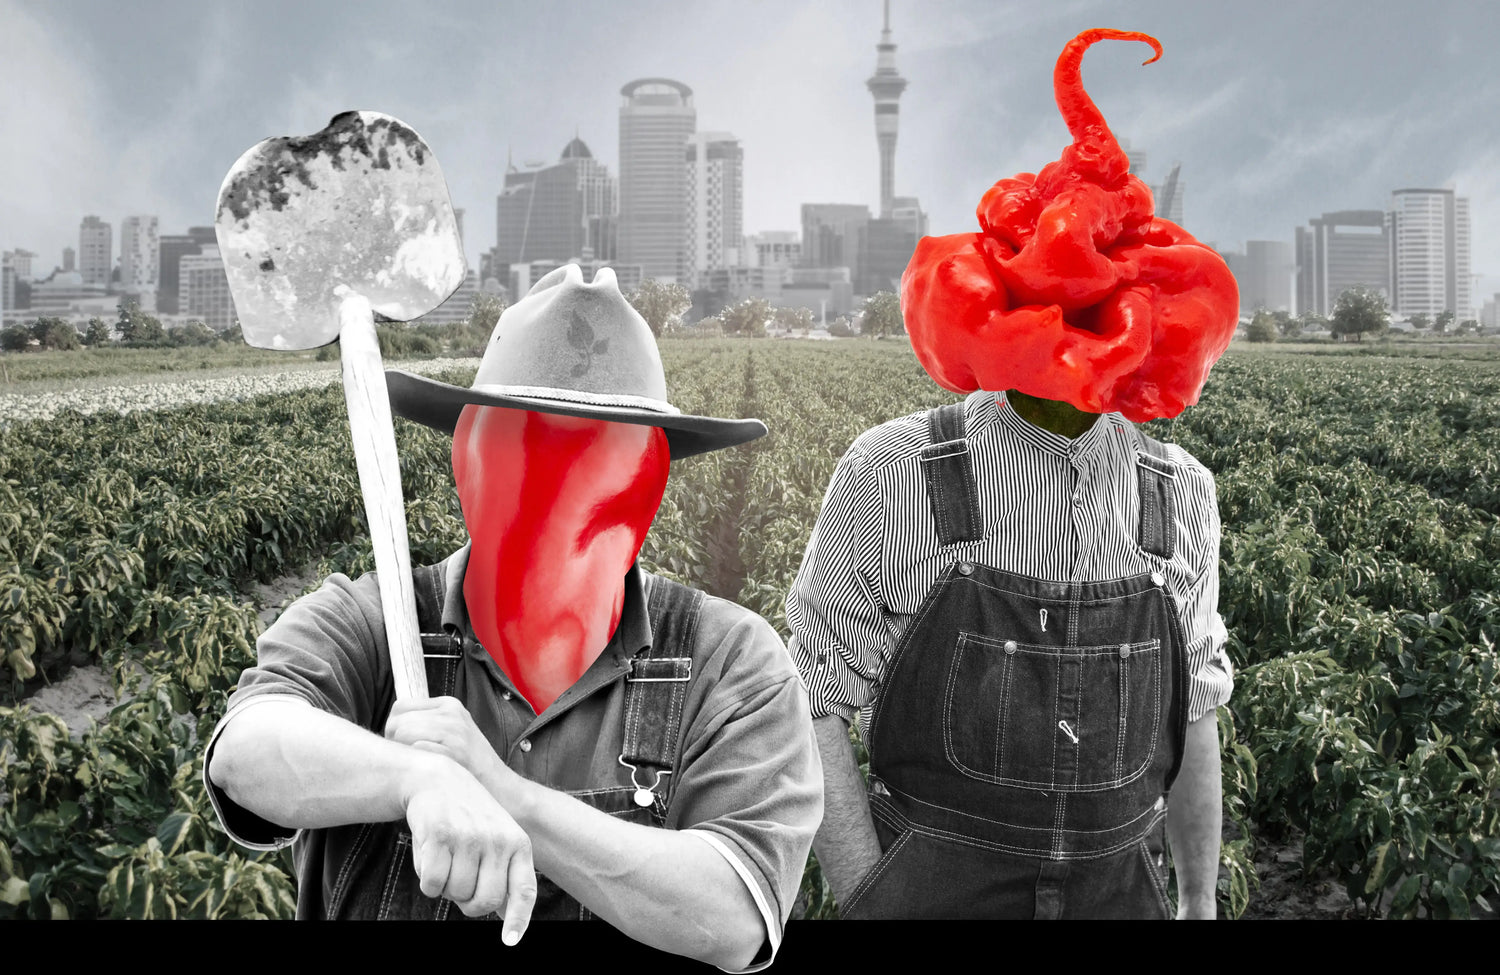 Chilli Seeds NZ 2 farmers with chillies for heads standing in a chilli field with Auckland in the distance.